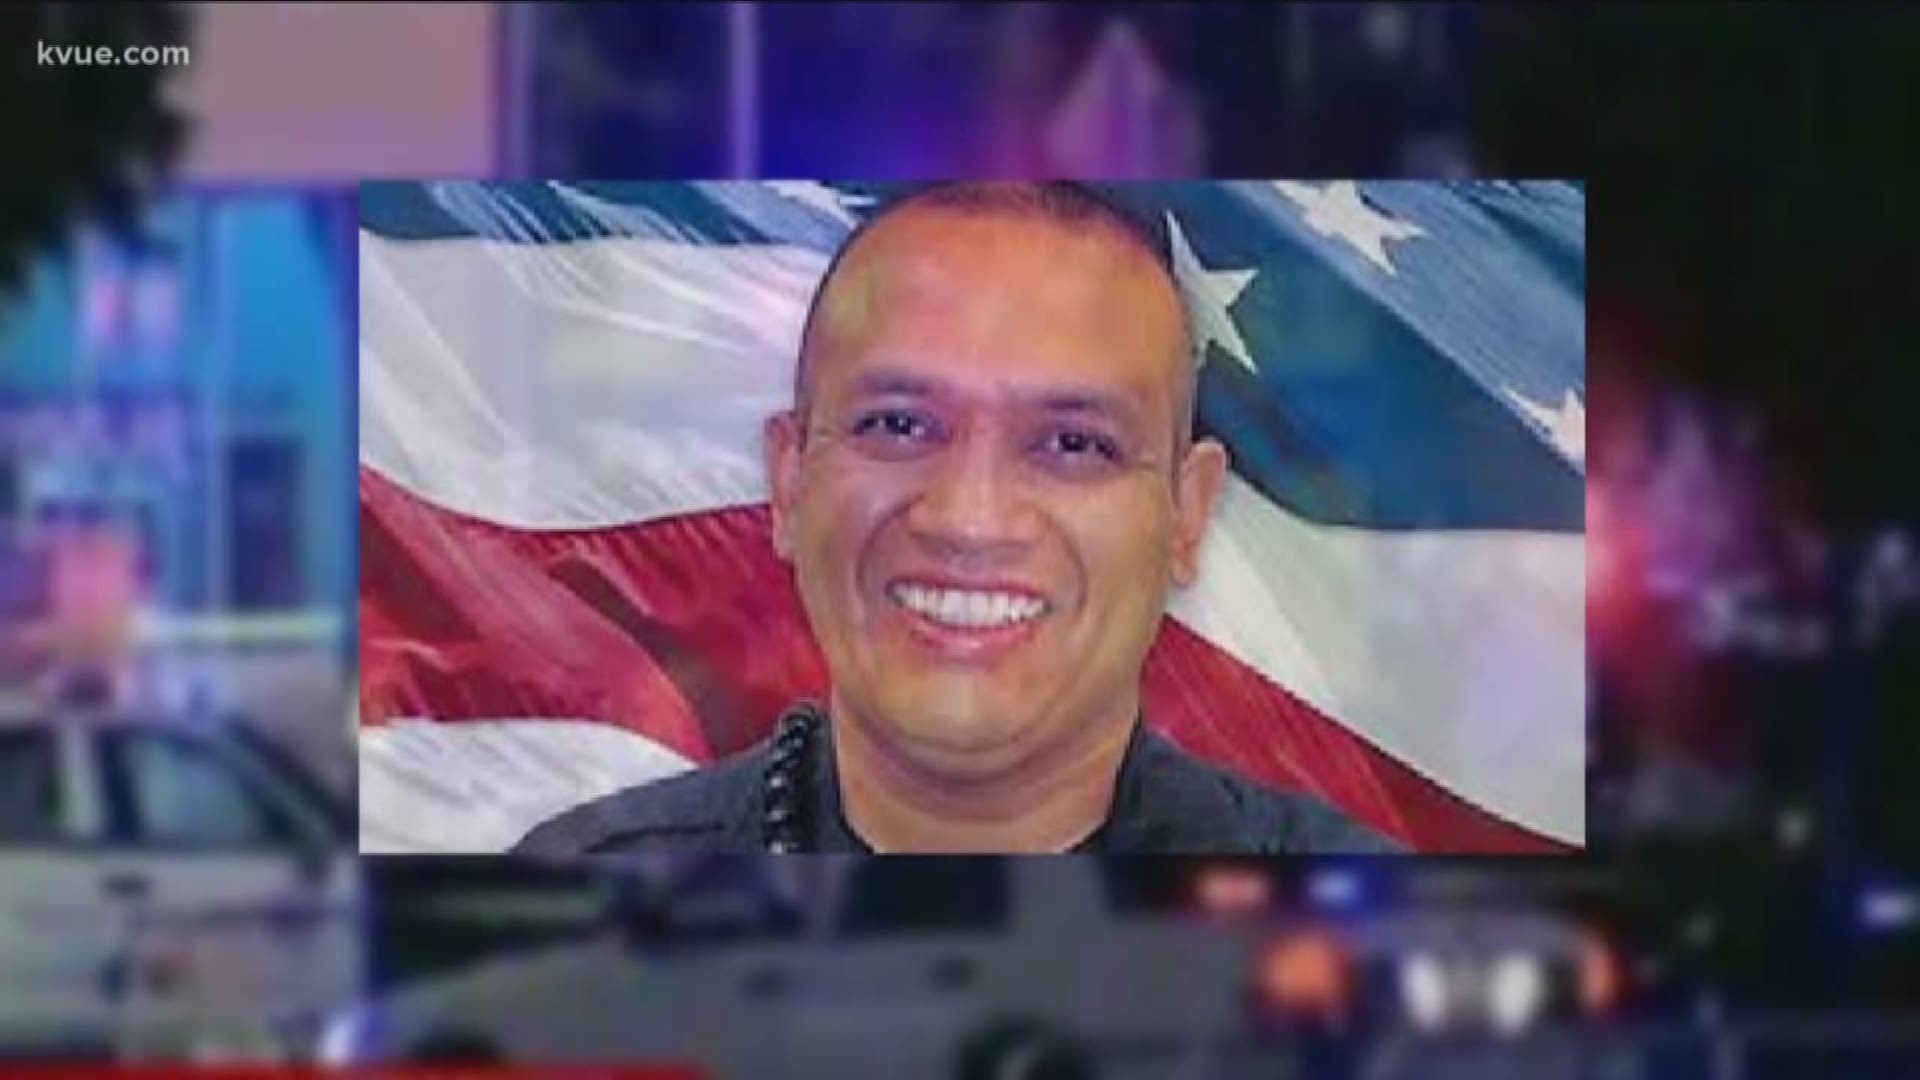 An Austin police officer was shot and killed in the line duty in 2012 and is being remembered with an 'honor chair.'